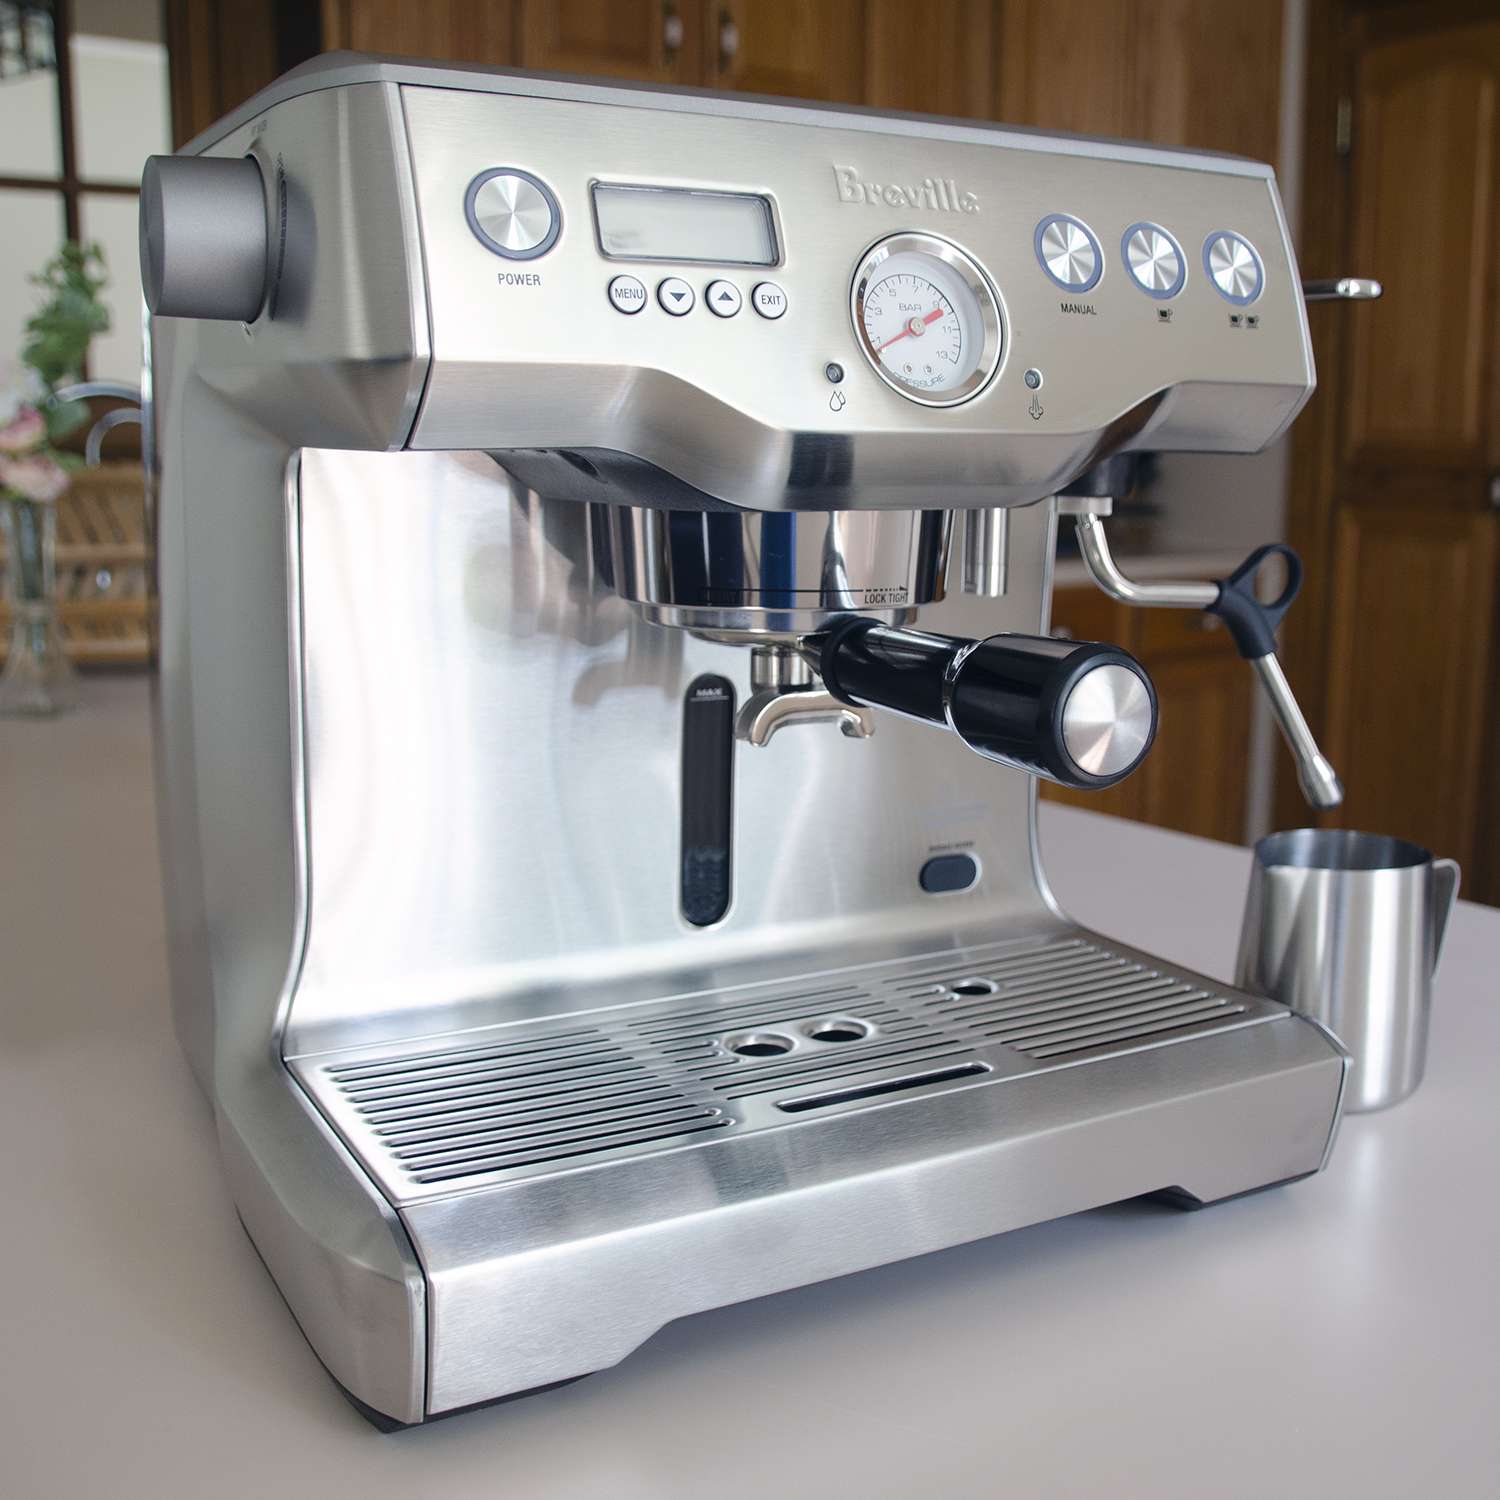 How Long Does A Breville Espresso Machine Last?